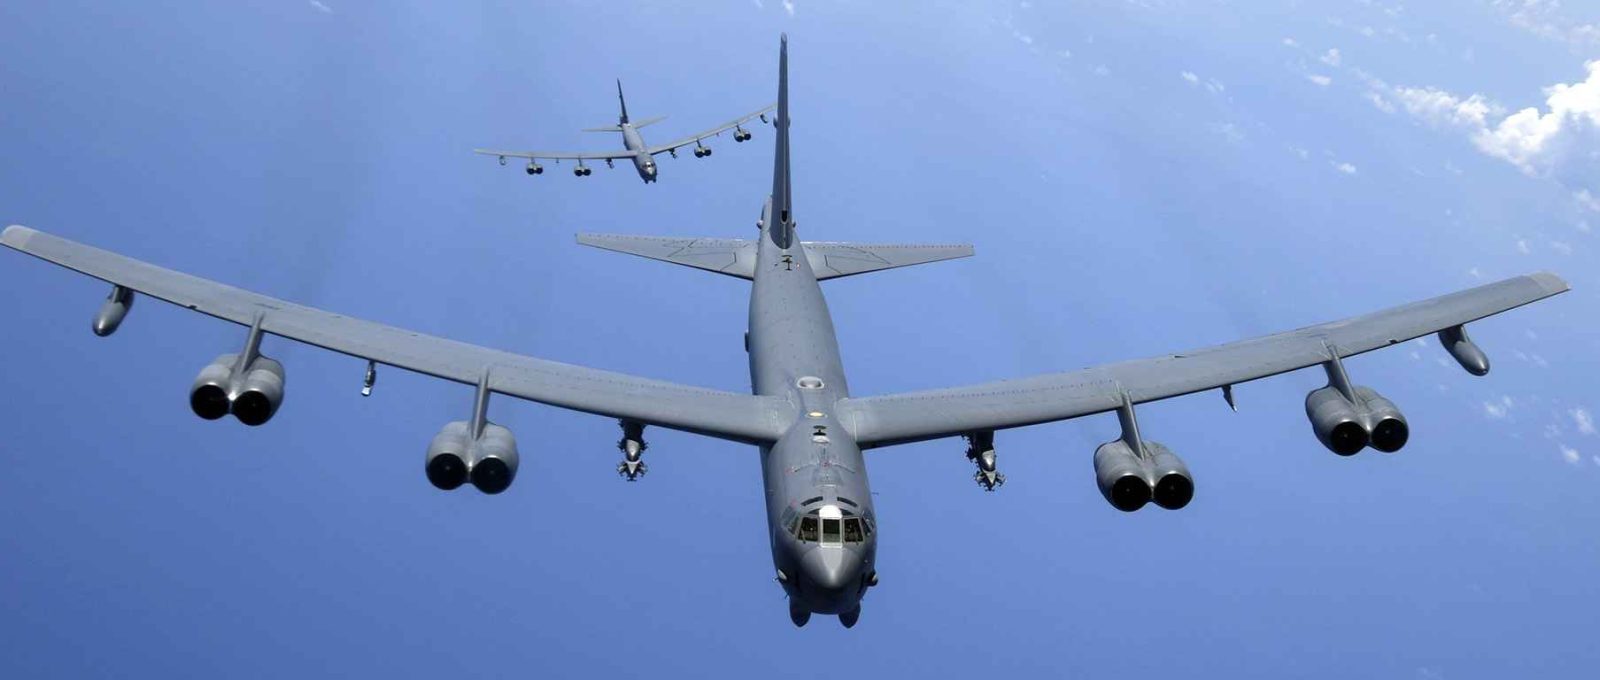 PACIFIC OCEAN (Aug. 2, 2018) Two U.S. Air Force B-52H Stratofortress bombers fly over the Pacific. Two U.S. Navy P-8A Poseidon aircraft assigned to Patrol Squadrons (VP) 45 and VP-4 joined the B-52s in a joint training mission in the vicinity of Japan over the East China Sea in support of U.S. Indo-Pacific Command’s Continuous Bomber Presence operations, which are a key component to improving combined and joint service interoperability. (U.S. Air Force photo by Airman 1st Class Gerald R. Willis)